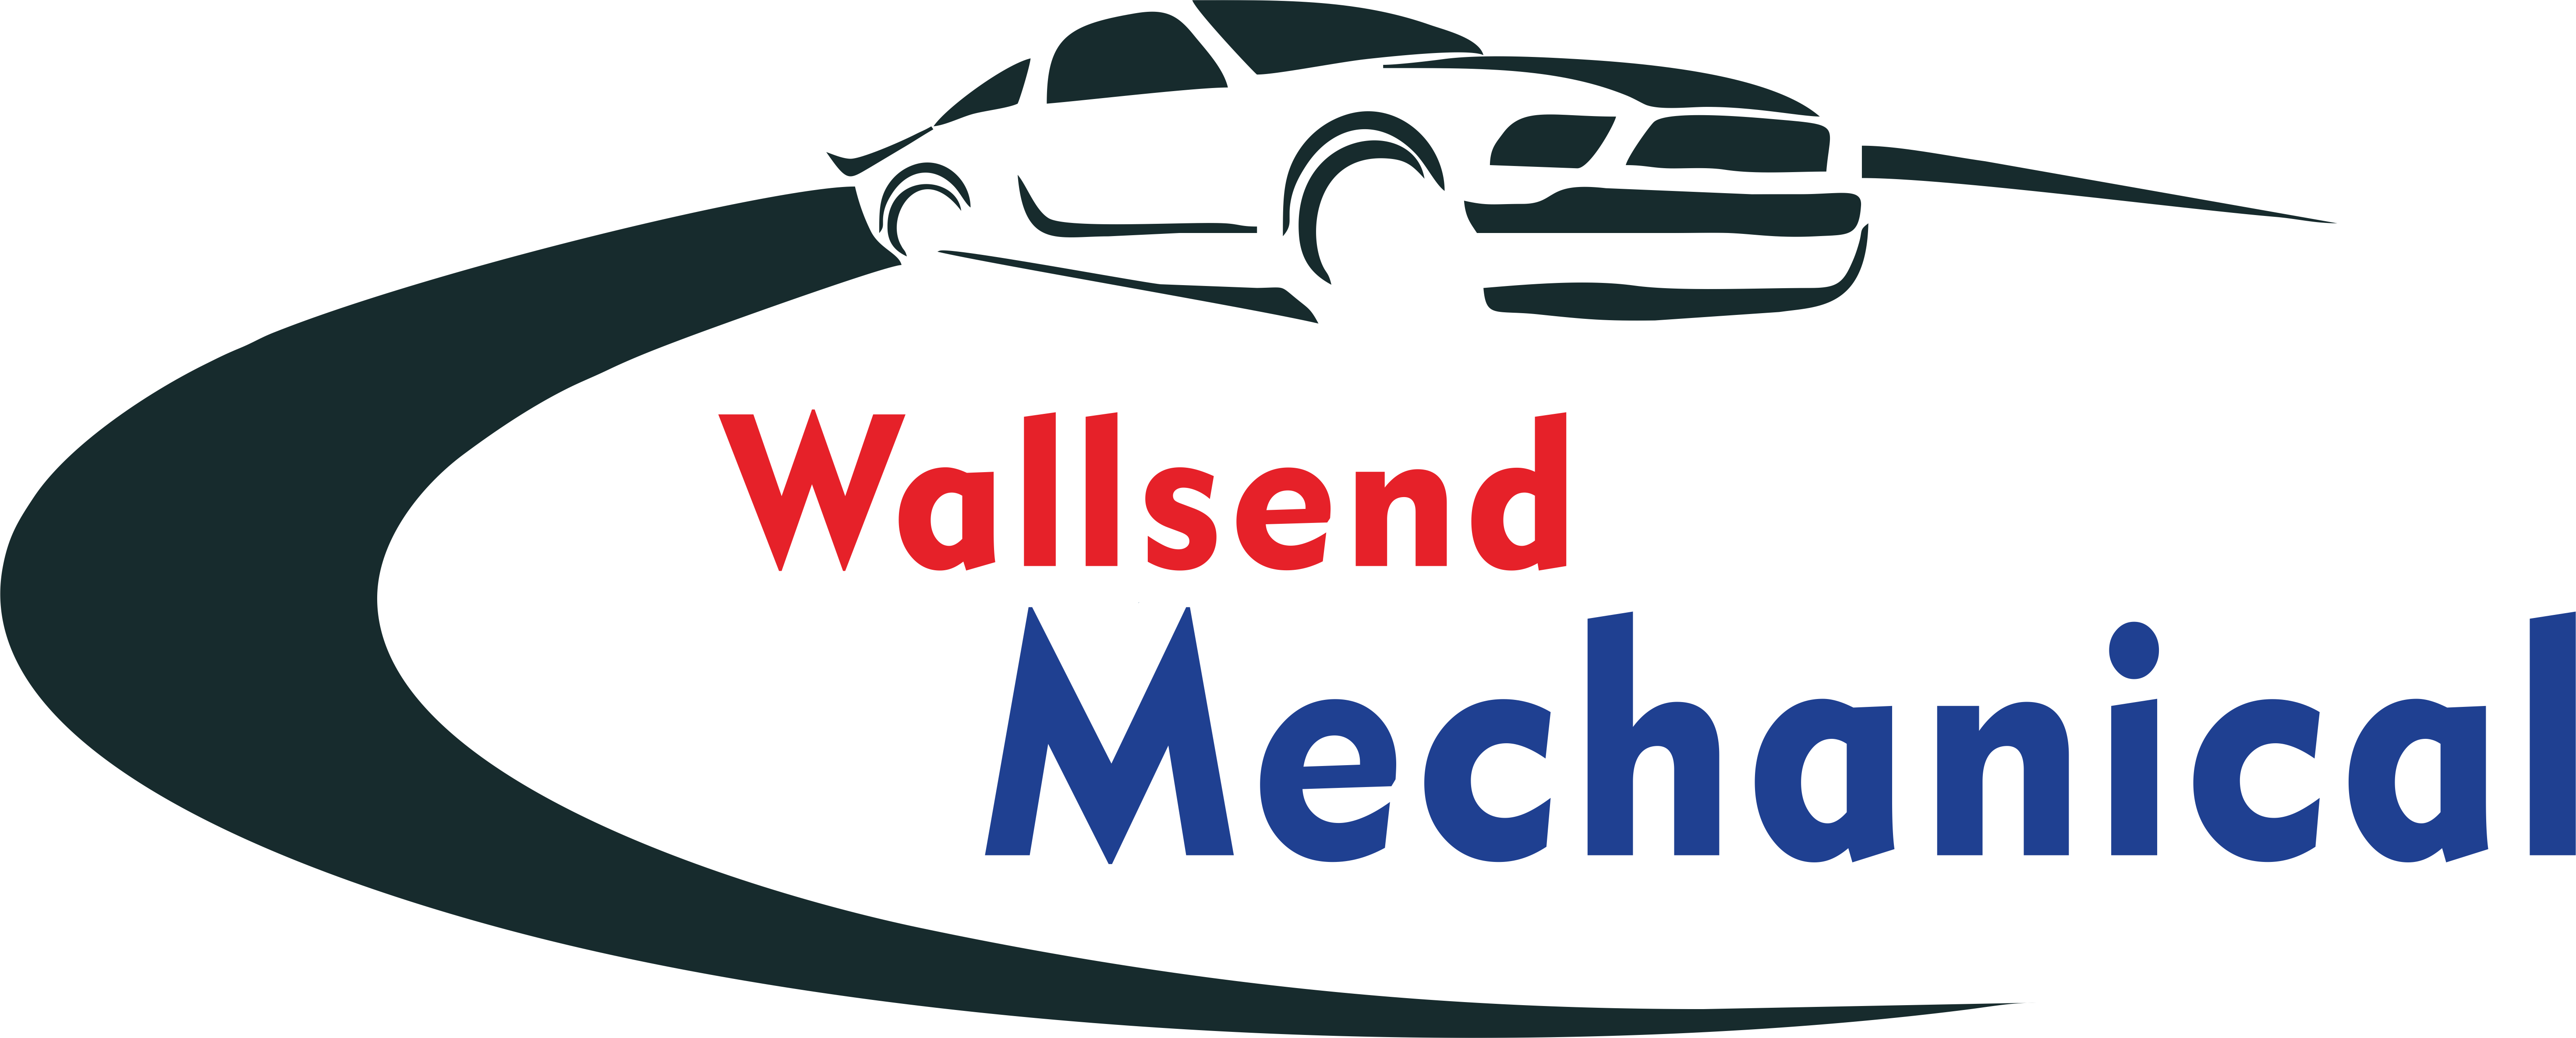 Need A Mechanic, A Service, Air Con Re-gassed, Performance - Mechanical Auto Logo Png (5880x2370)